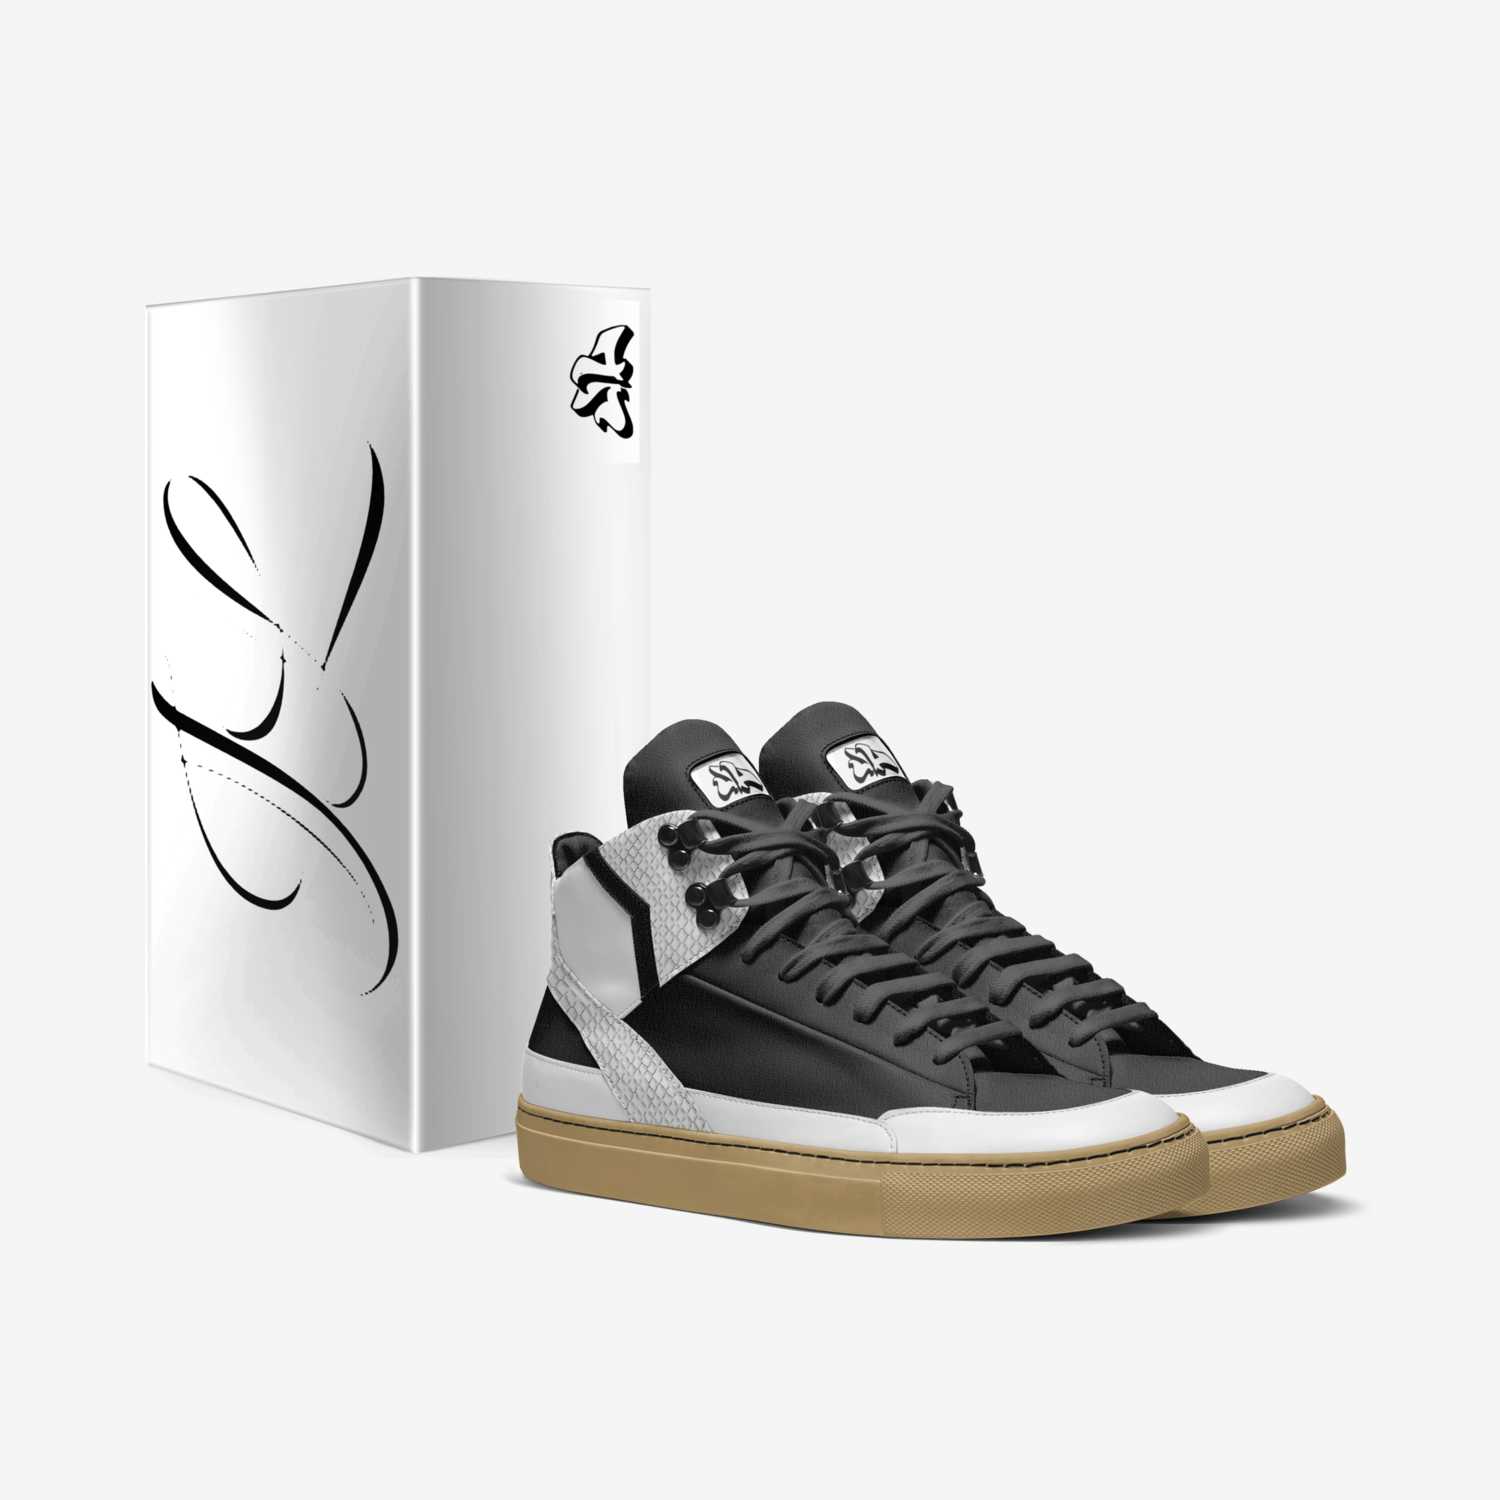 jayelz - EUPHORIA custom made in Italy shoes by Jacob Shepler | Box view